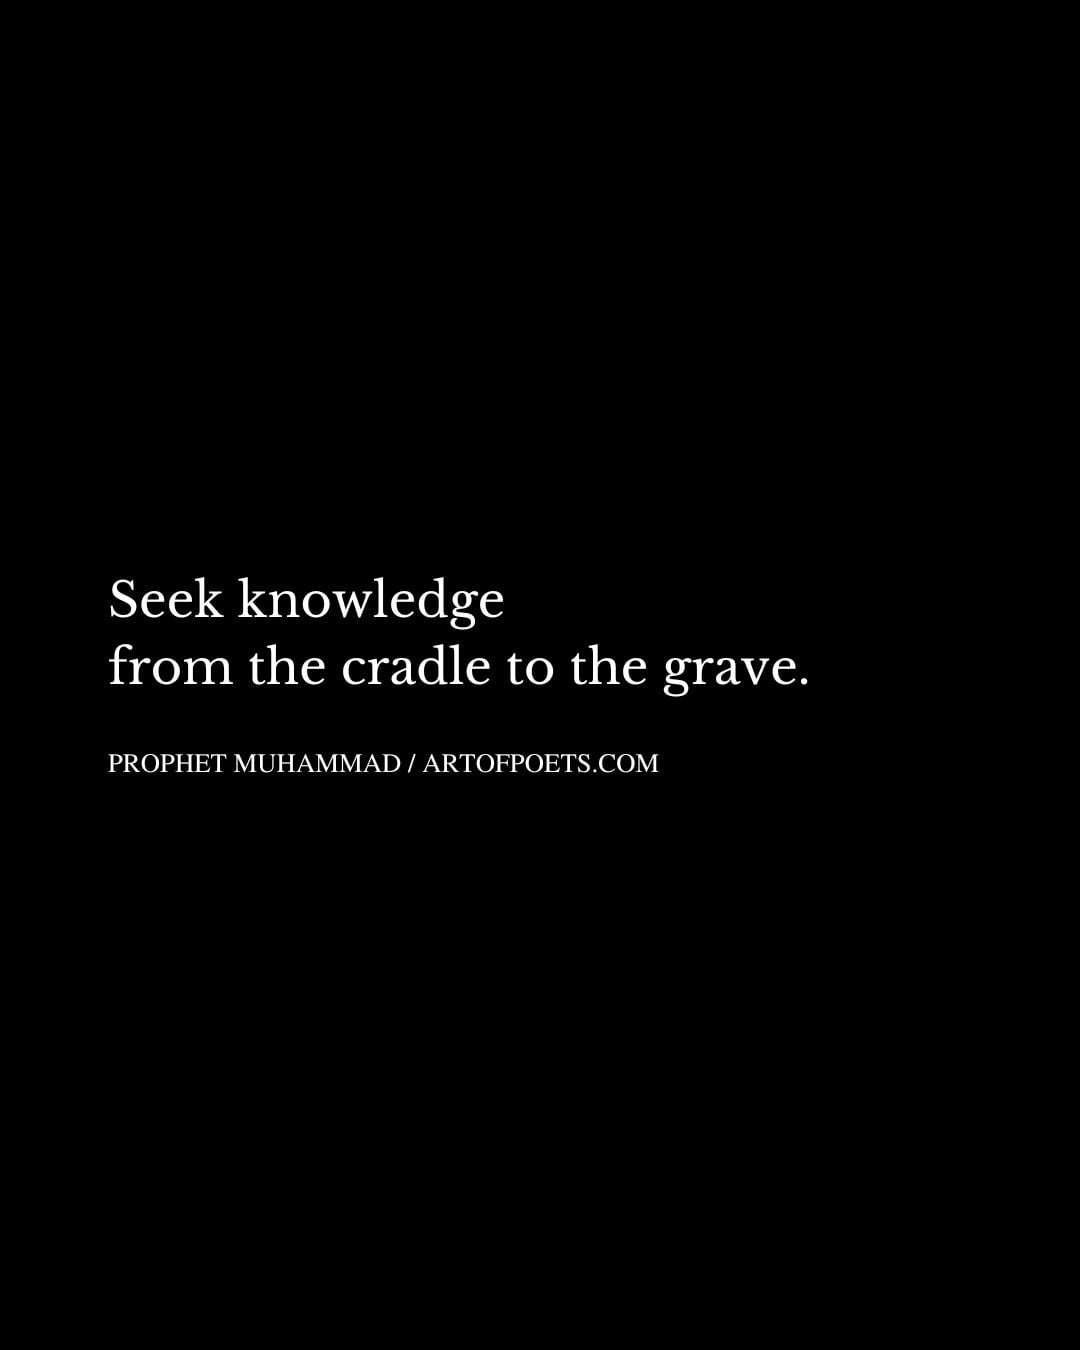 Seek knowledge from the cradle to the grave